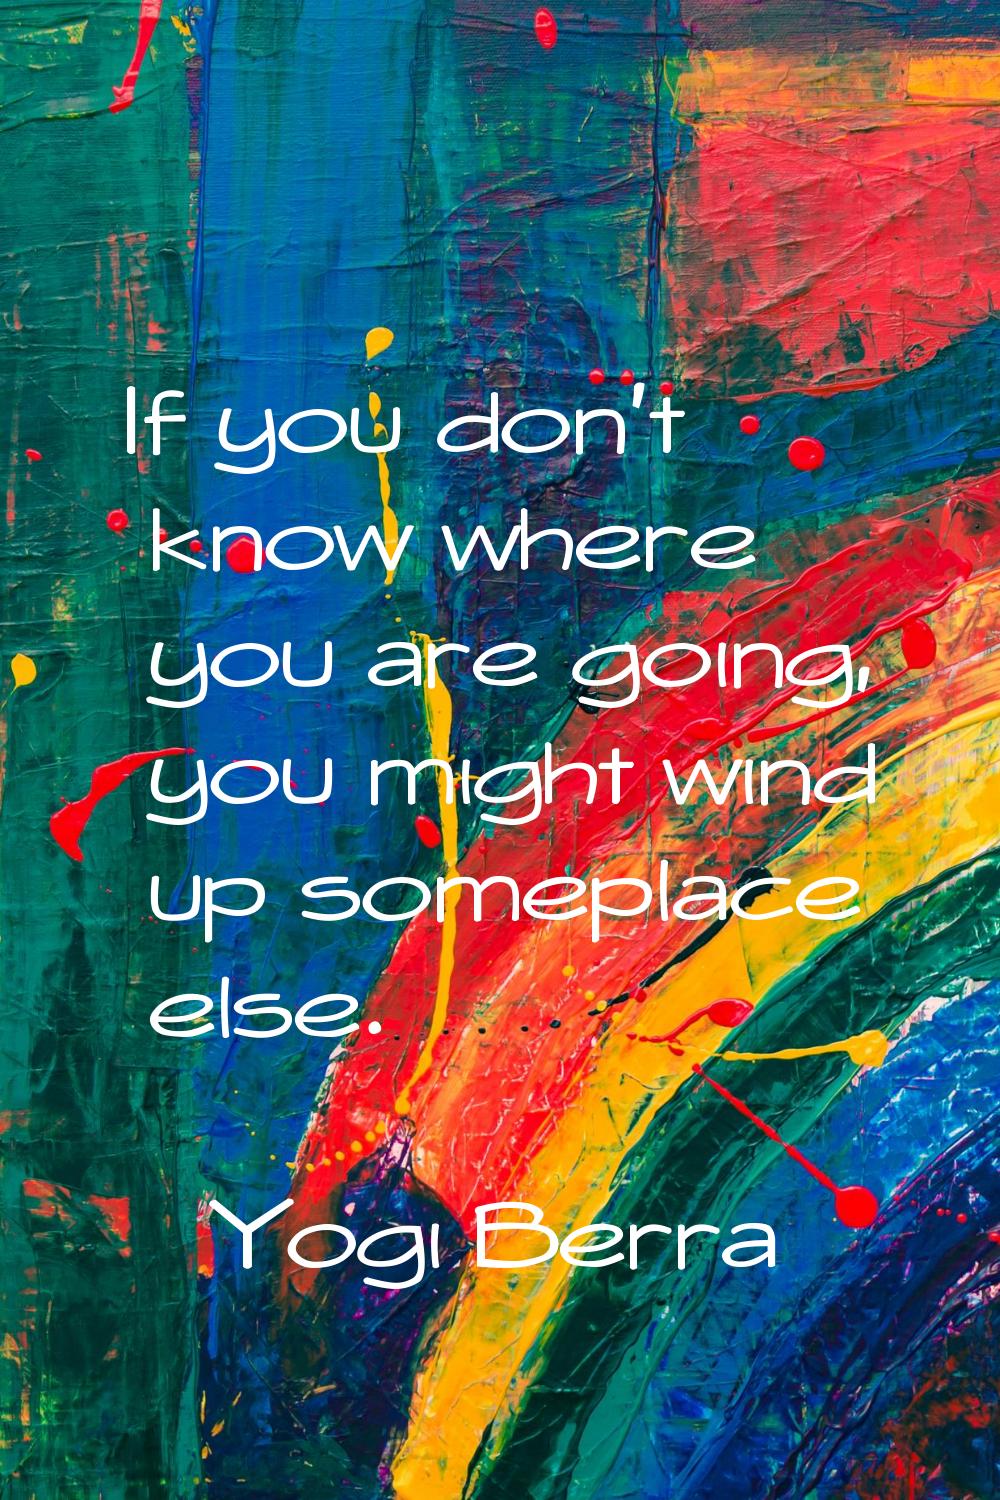 If you don't know where you are going, you might wind up someplace else.